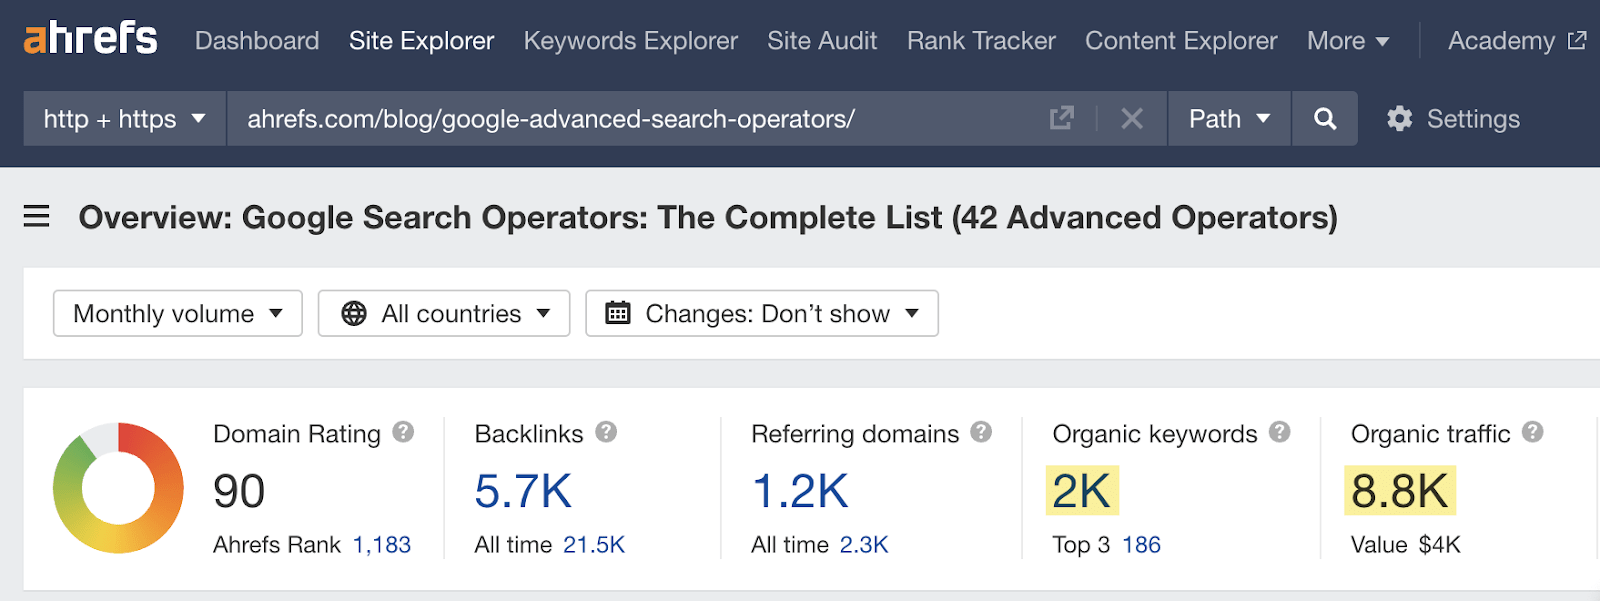 Site Explorer overview of Ahrefs' article on Google search operators 